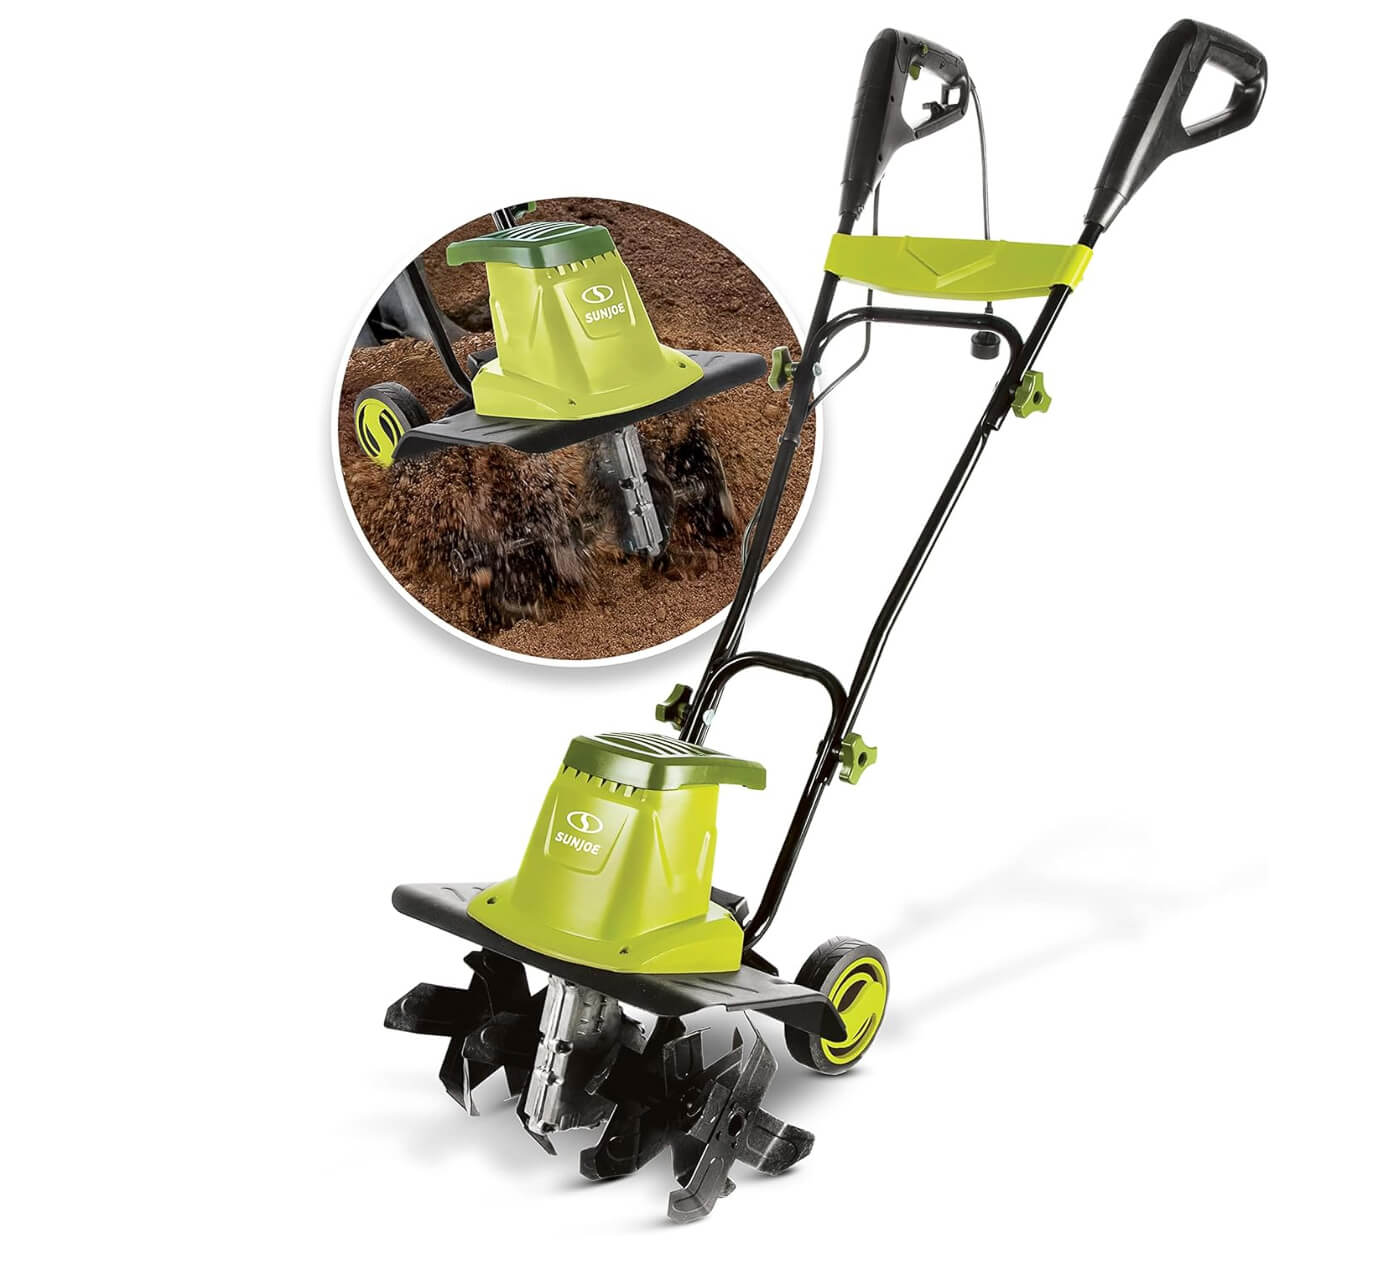 Electric tiller available from Amazon.